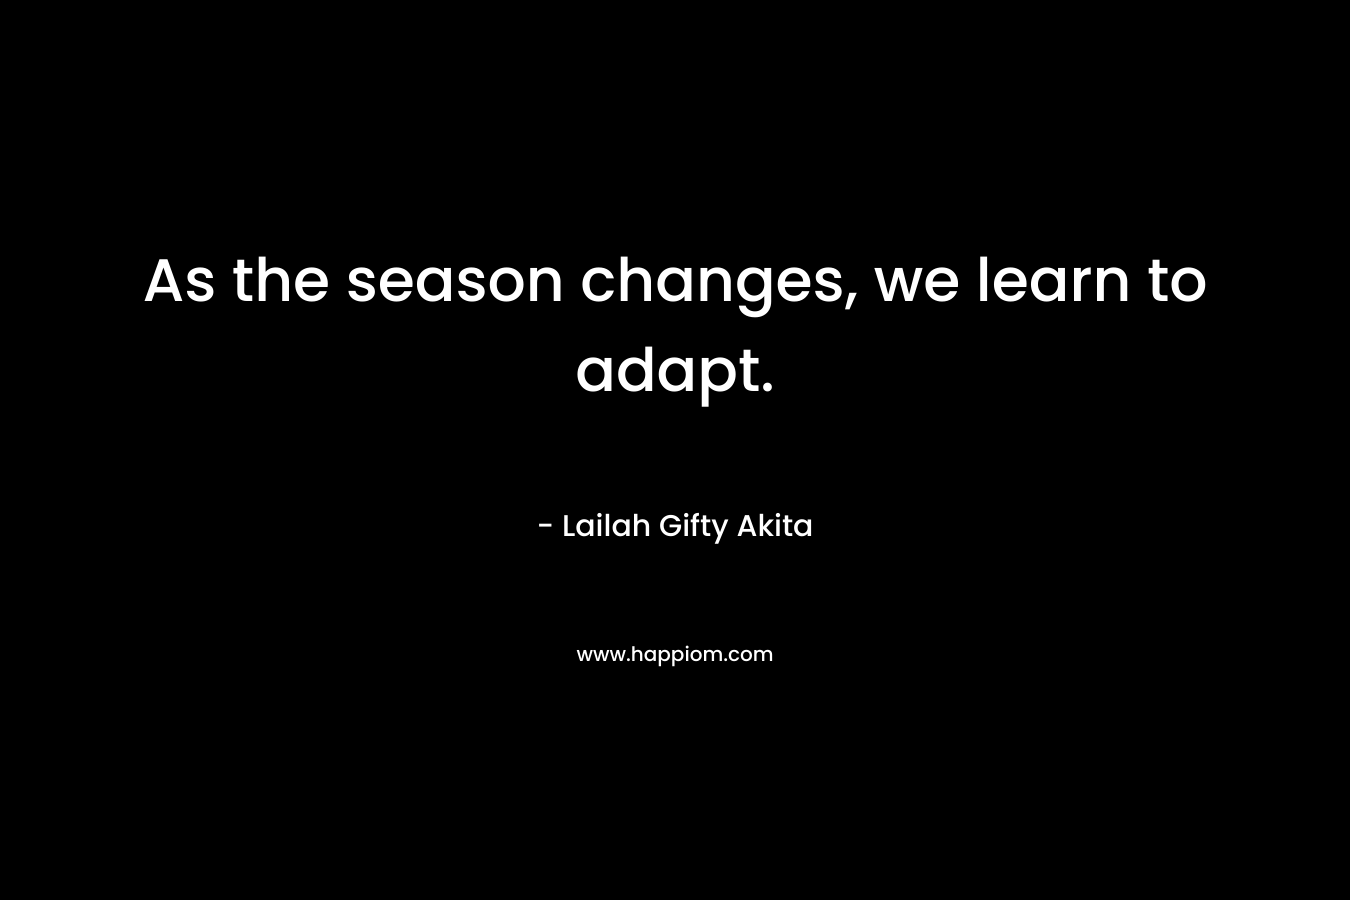 As the season changes, we learn to adapt.